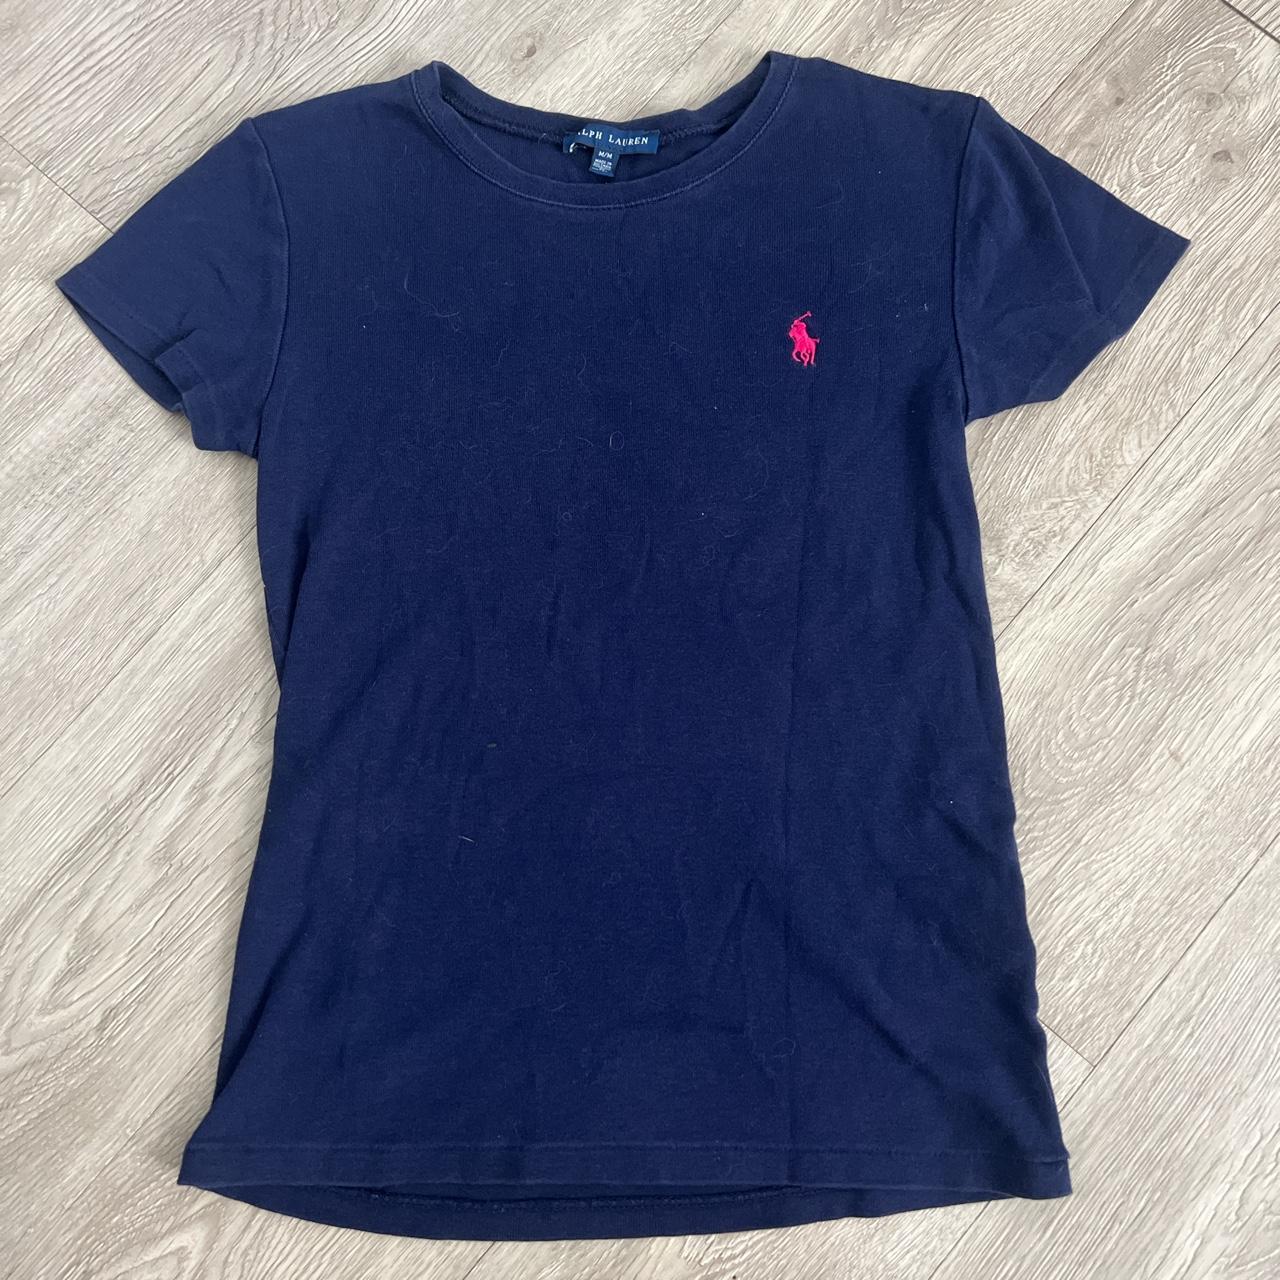 navy blue with pink horse polo shirt size med #polo... - Depop